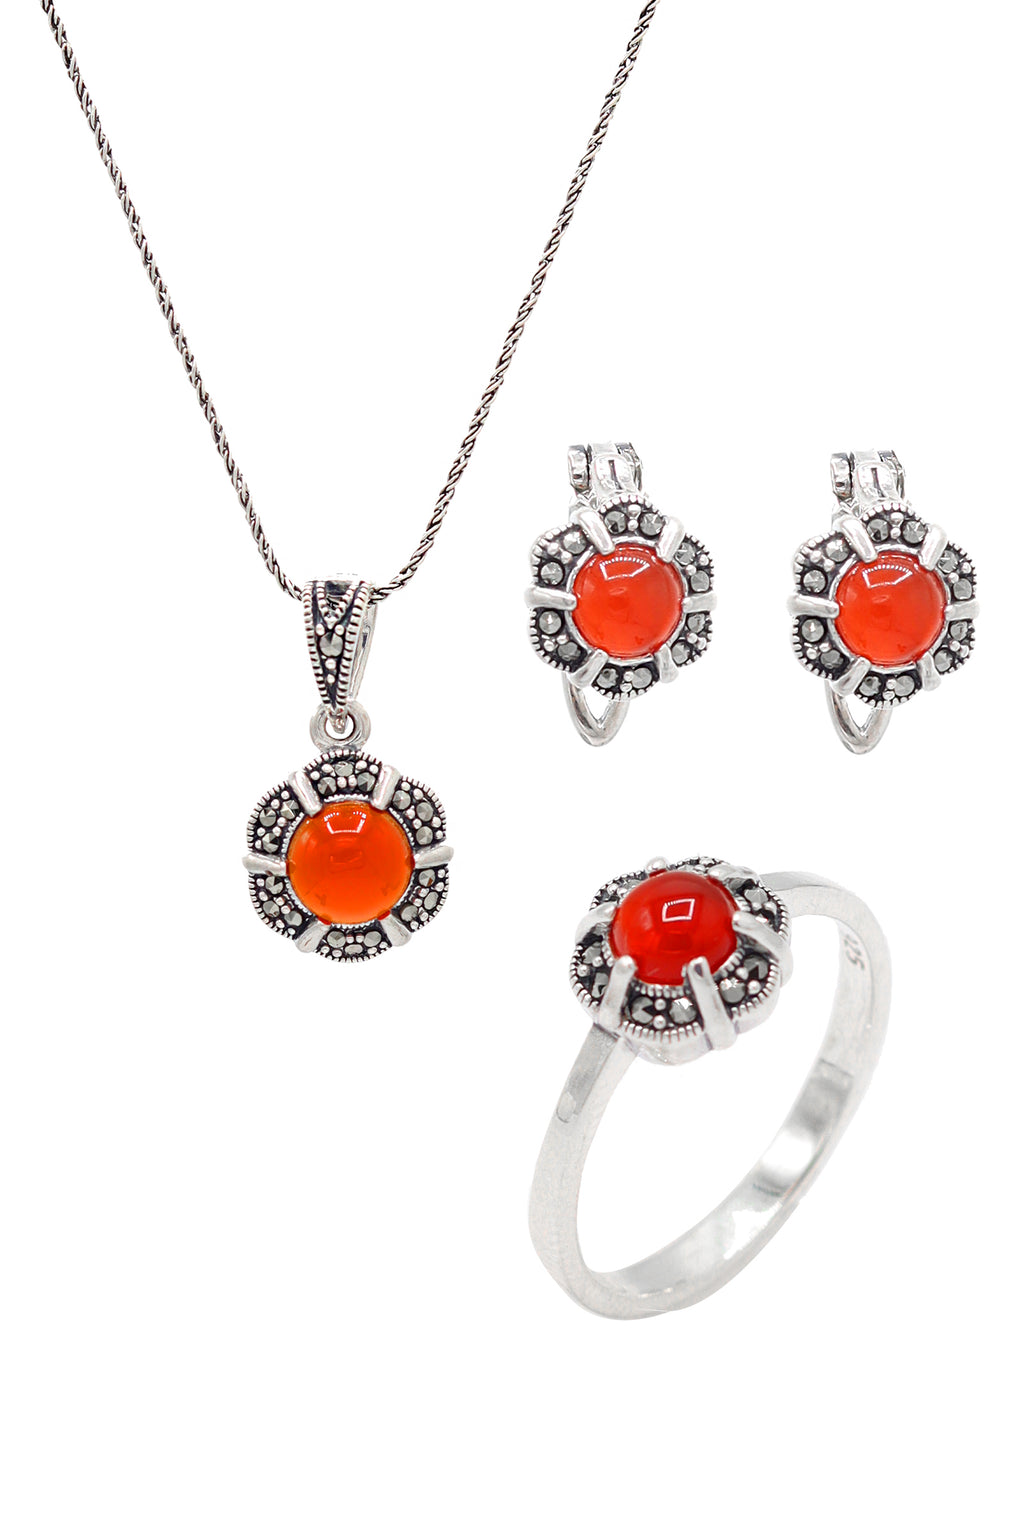 Floral Model Silver Triple Jewelry Set With Agate (NG201021939)